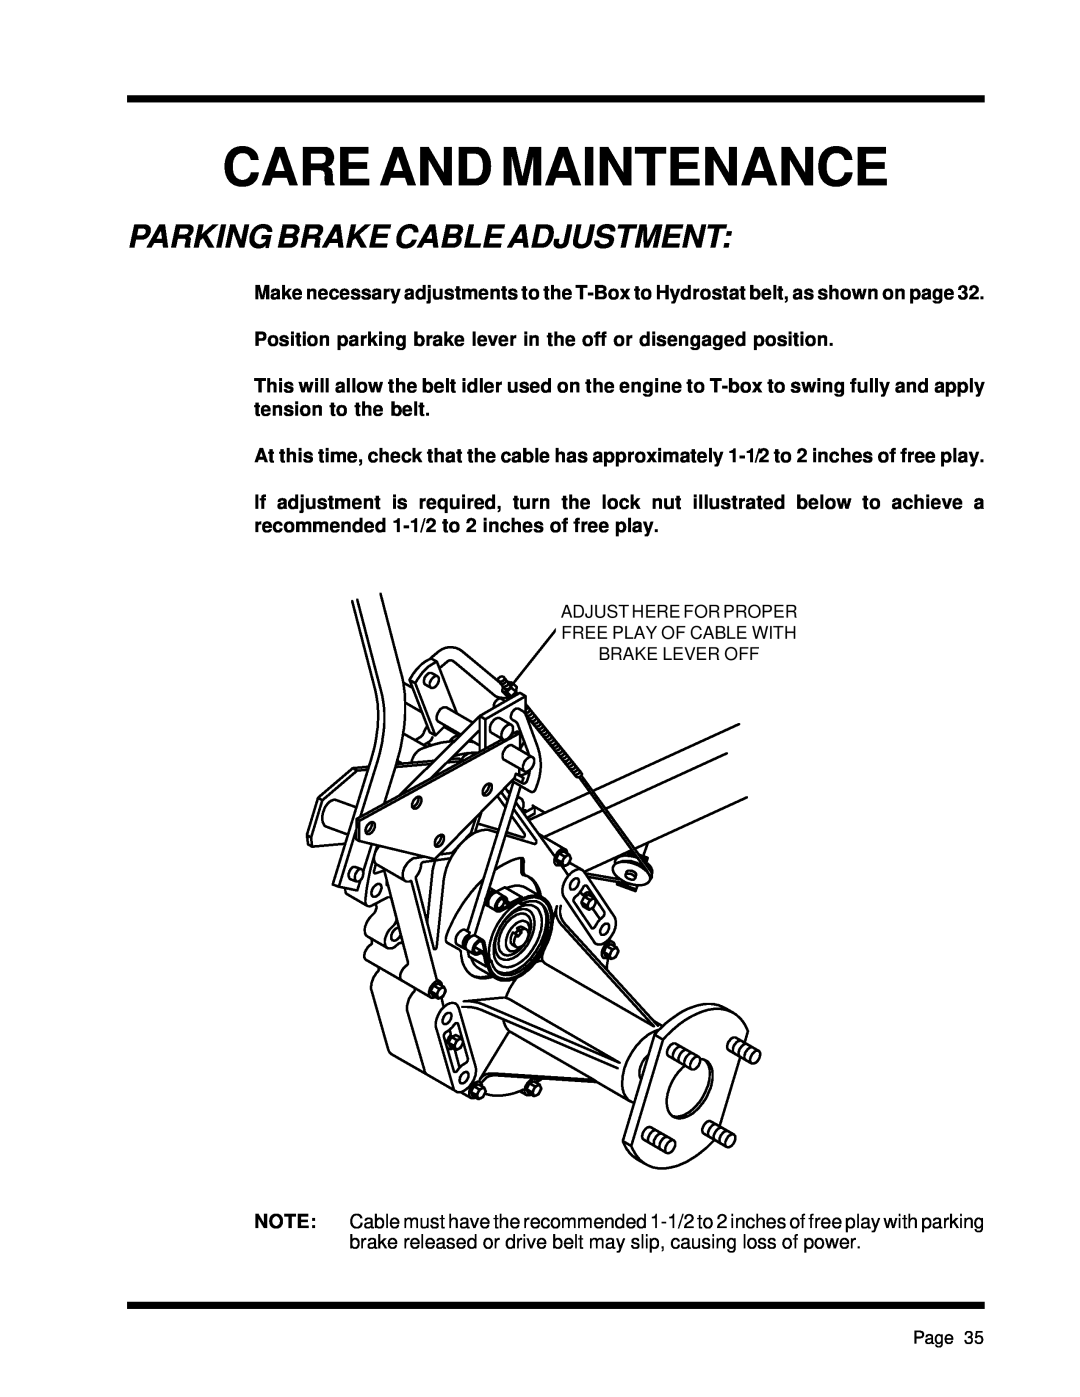 Dixon ZTR 5425 Parking Brake Cable Adjustment, Care And Maintenance, Adjust Here For Proper Free Play Of Cable With, Page 